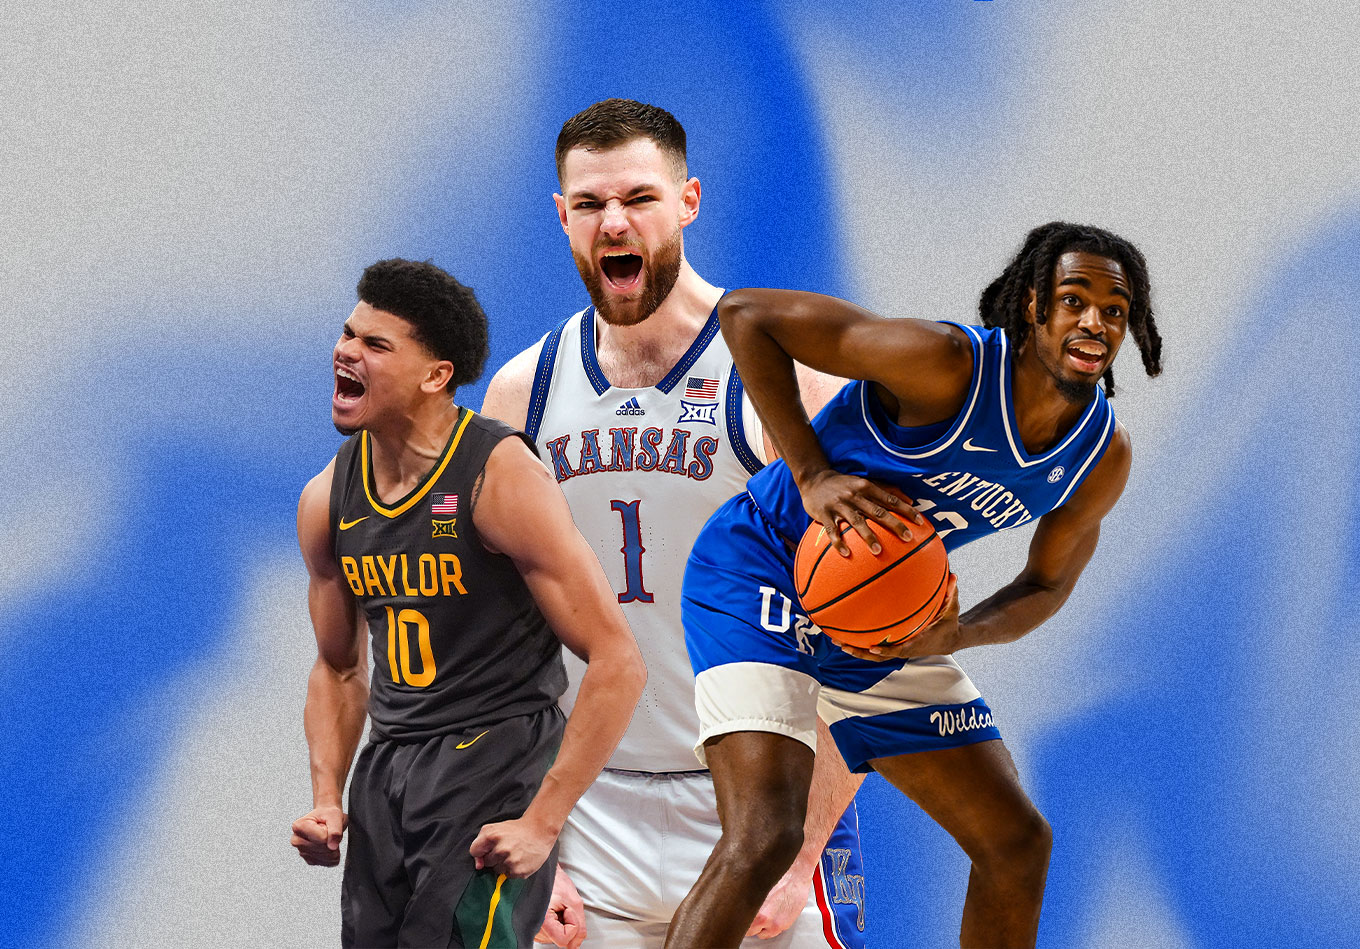 College Basketball Predictions: Who Will Win This Weekend’s Biggest Games?